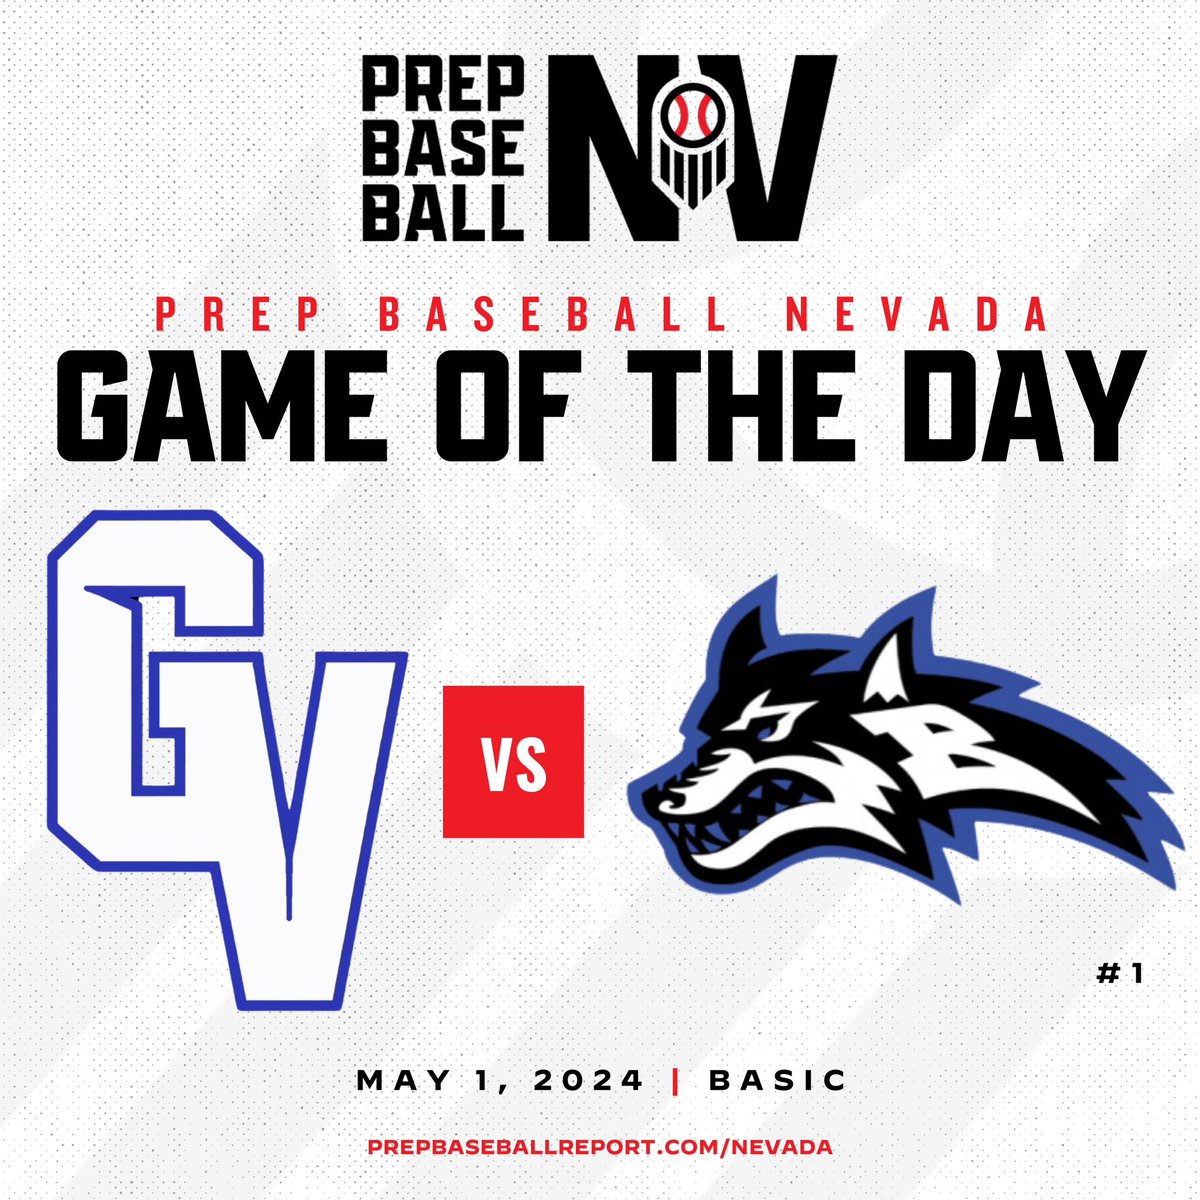 ⚾️𝐆𝐀𝐌𝐄 𝐎𝐅 𝐓𝐇𝐄 𝐃𝐀𝐘⚾️ Today’s Game of the Day features the #1 ranked Basic Wolves taking on a talented Green Valley group who is fighting for the final Playoff spot in the Class 5A - Mountain League #BeSeen @prepbaseball | @B_HarrisonPBR